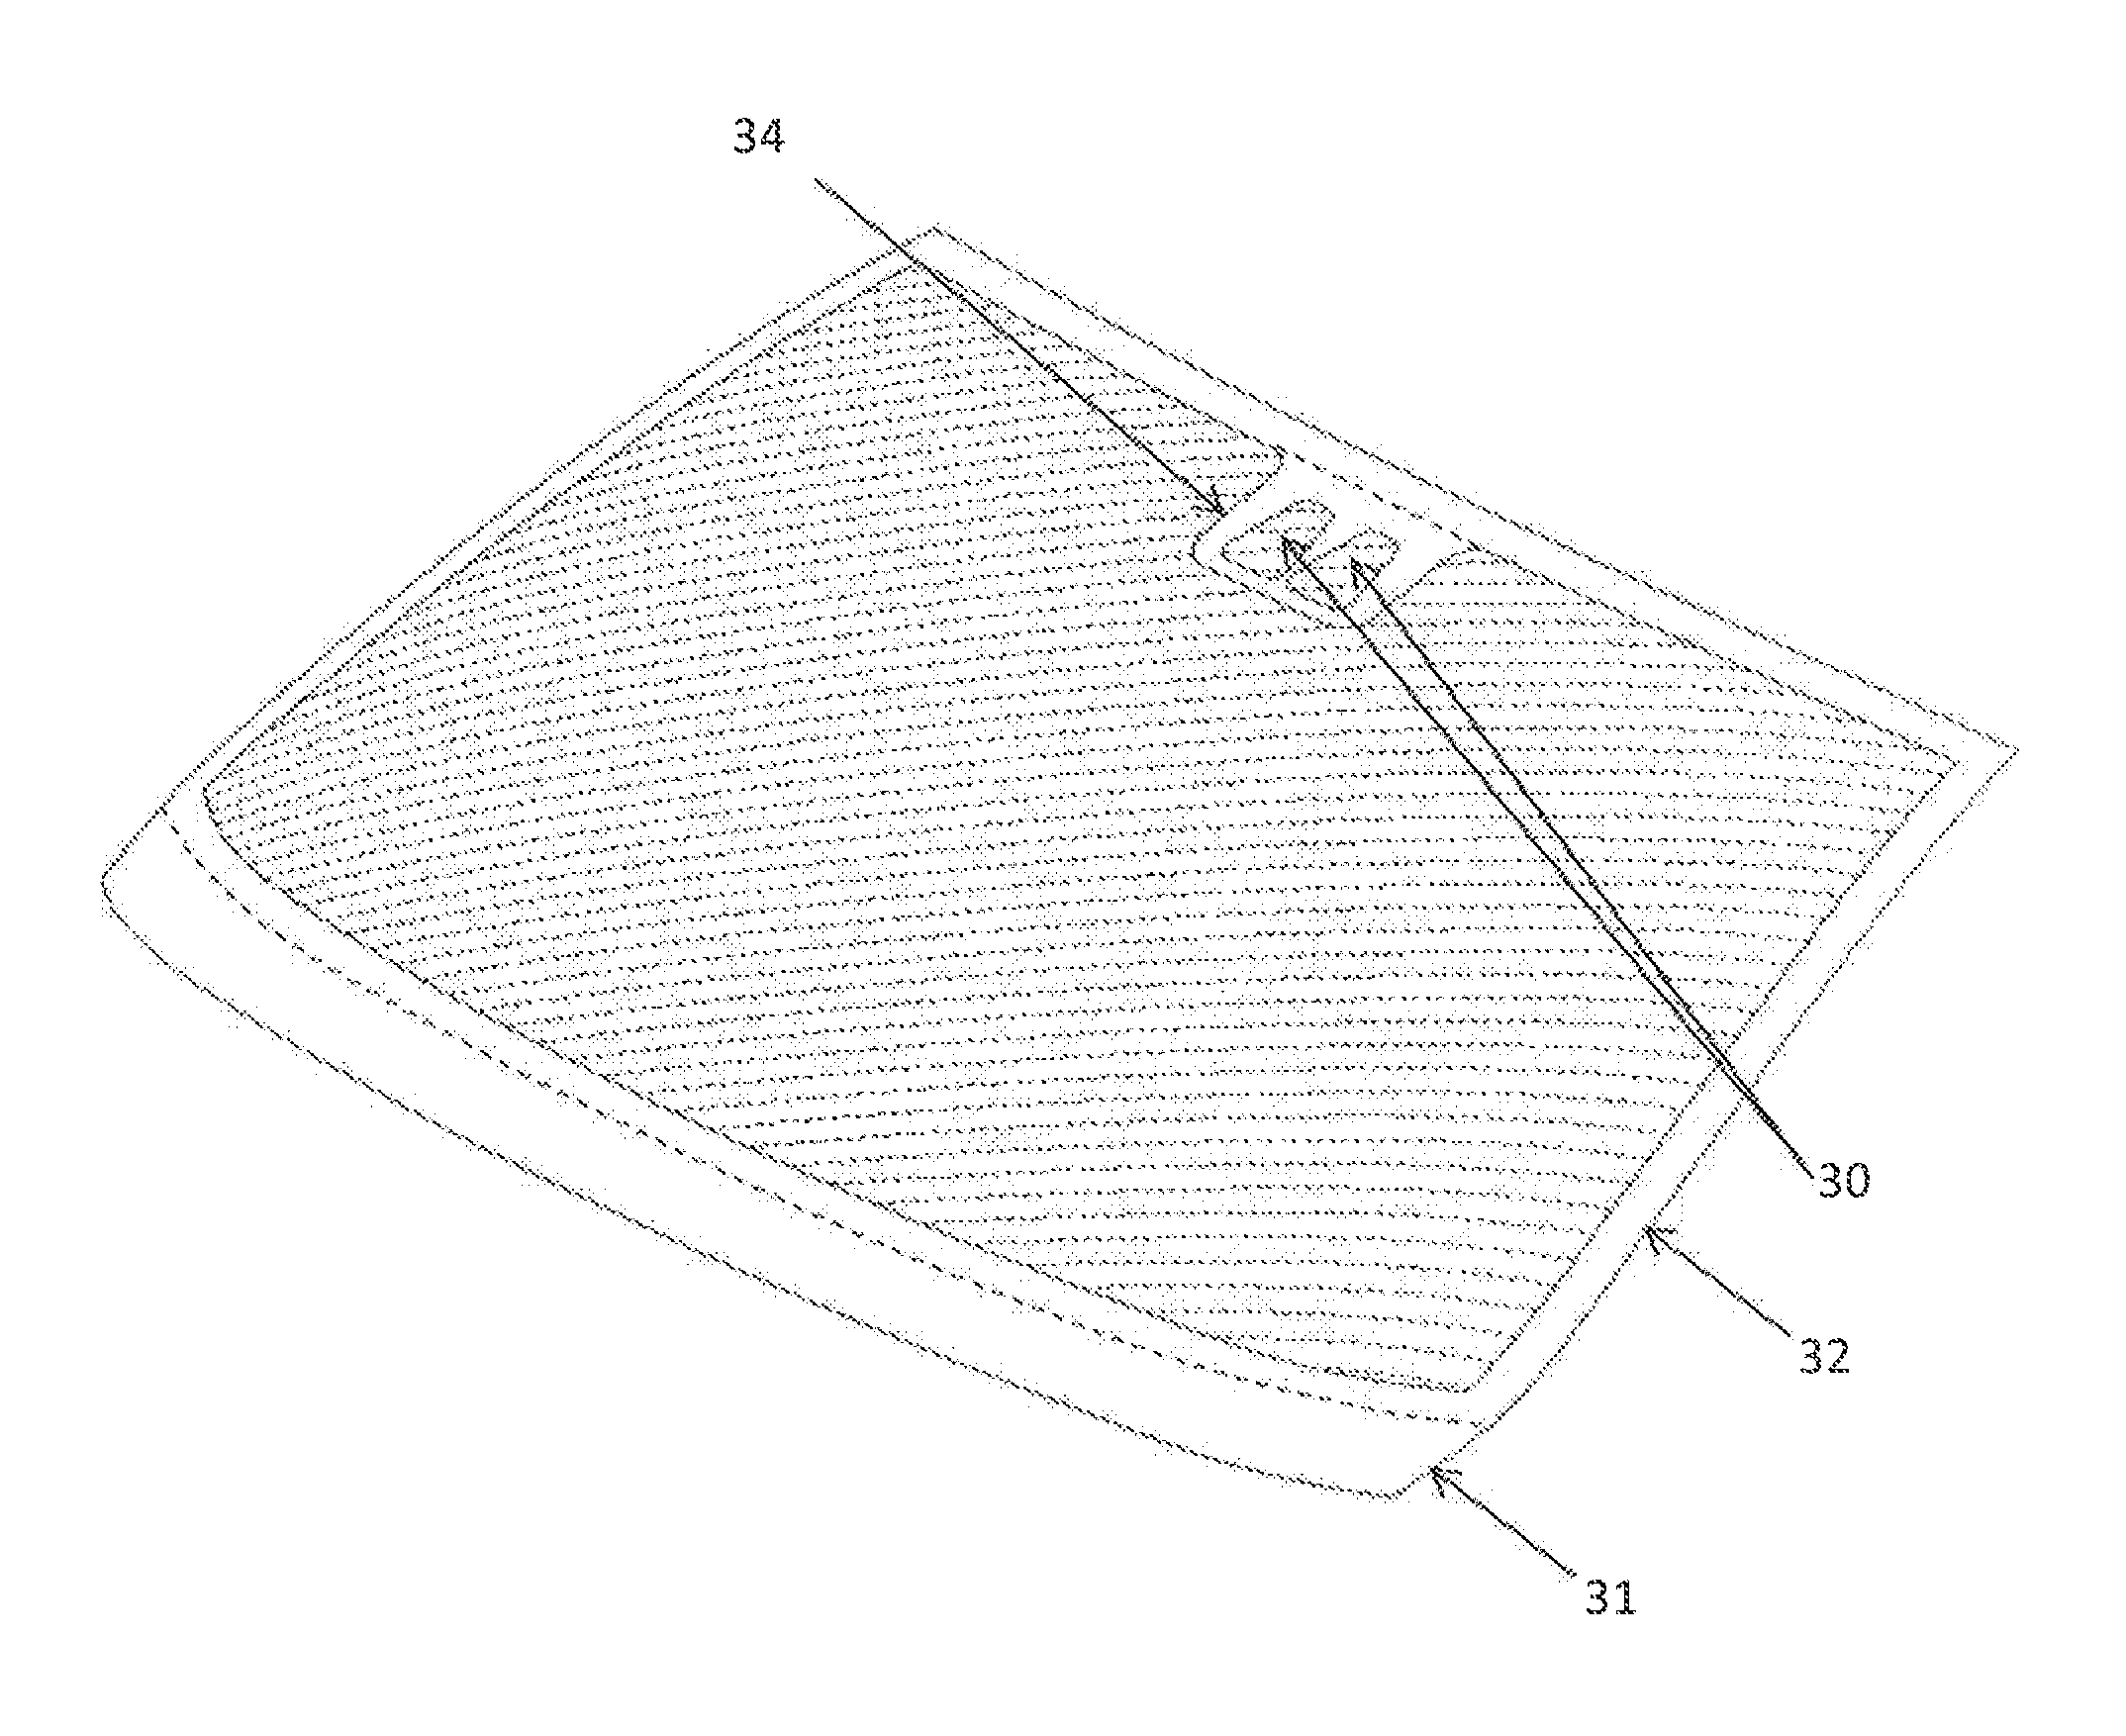 Obscuration having superior strength and optical quality for a laminated automotive windshield